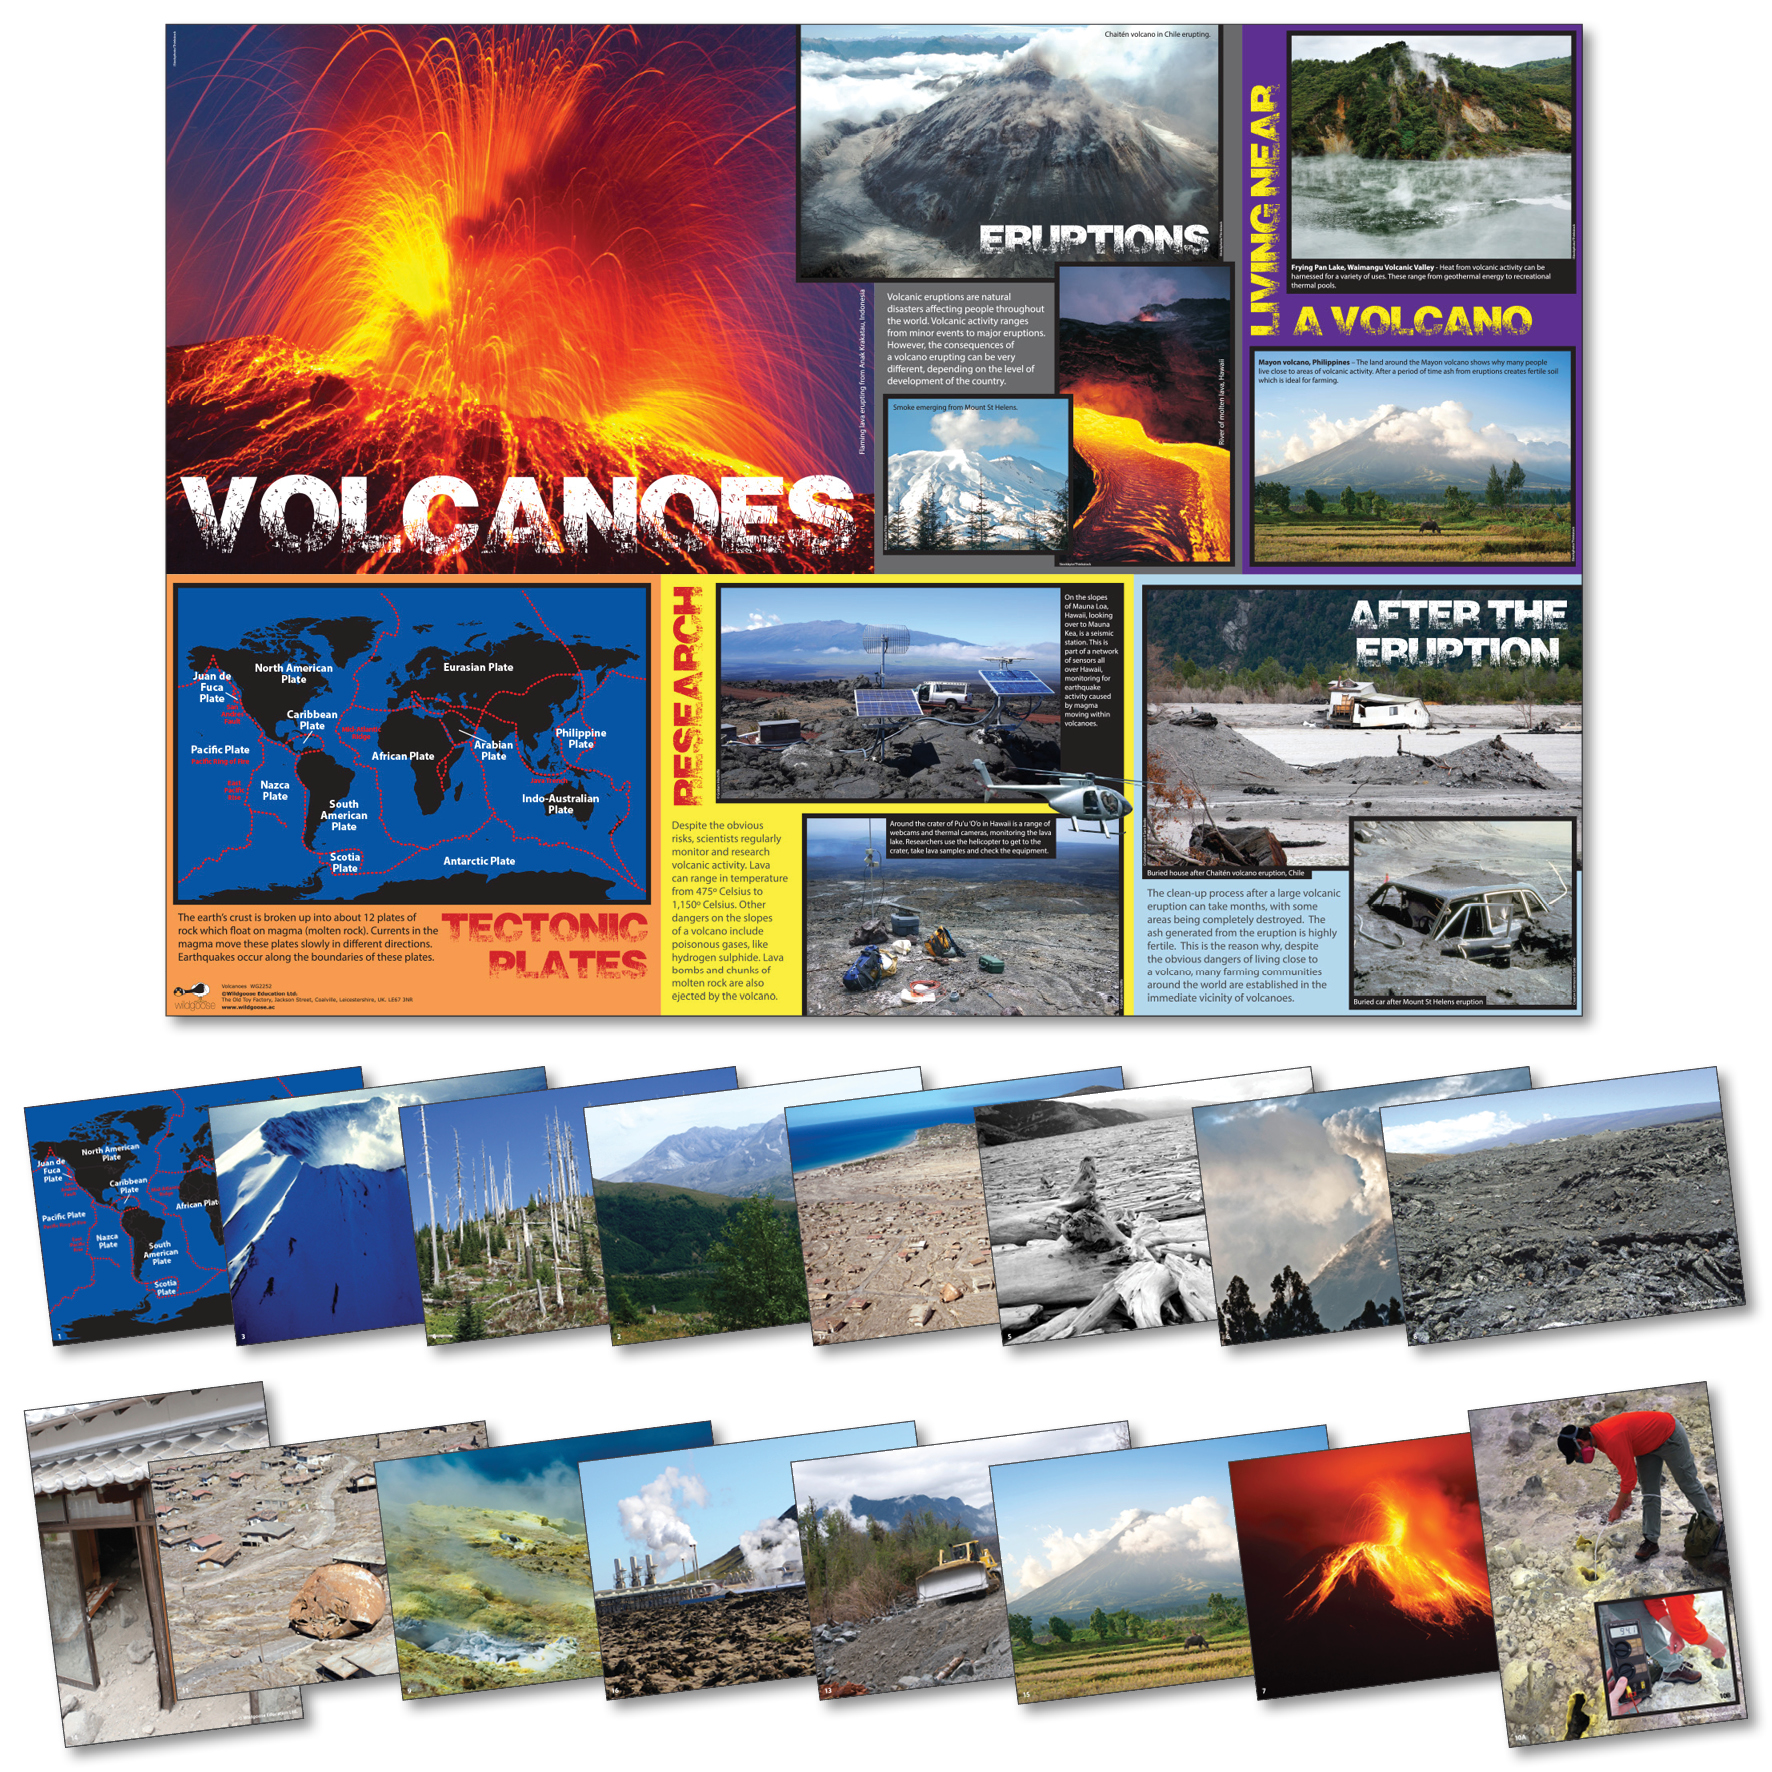 What are volcanoes and how do they impact us?